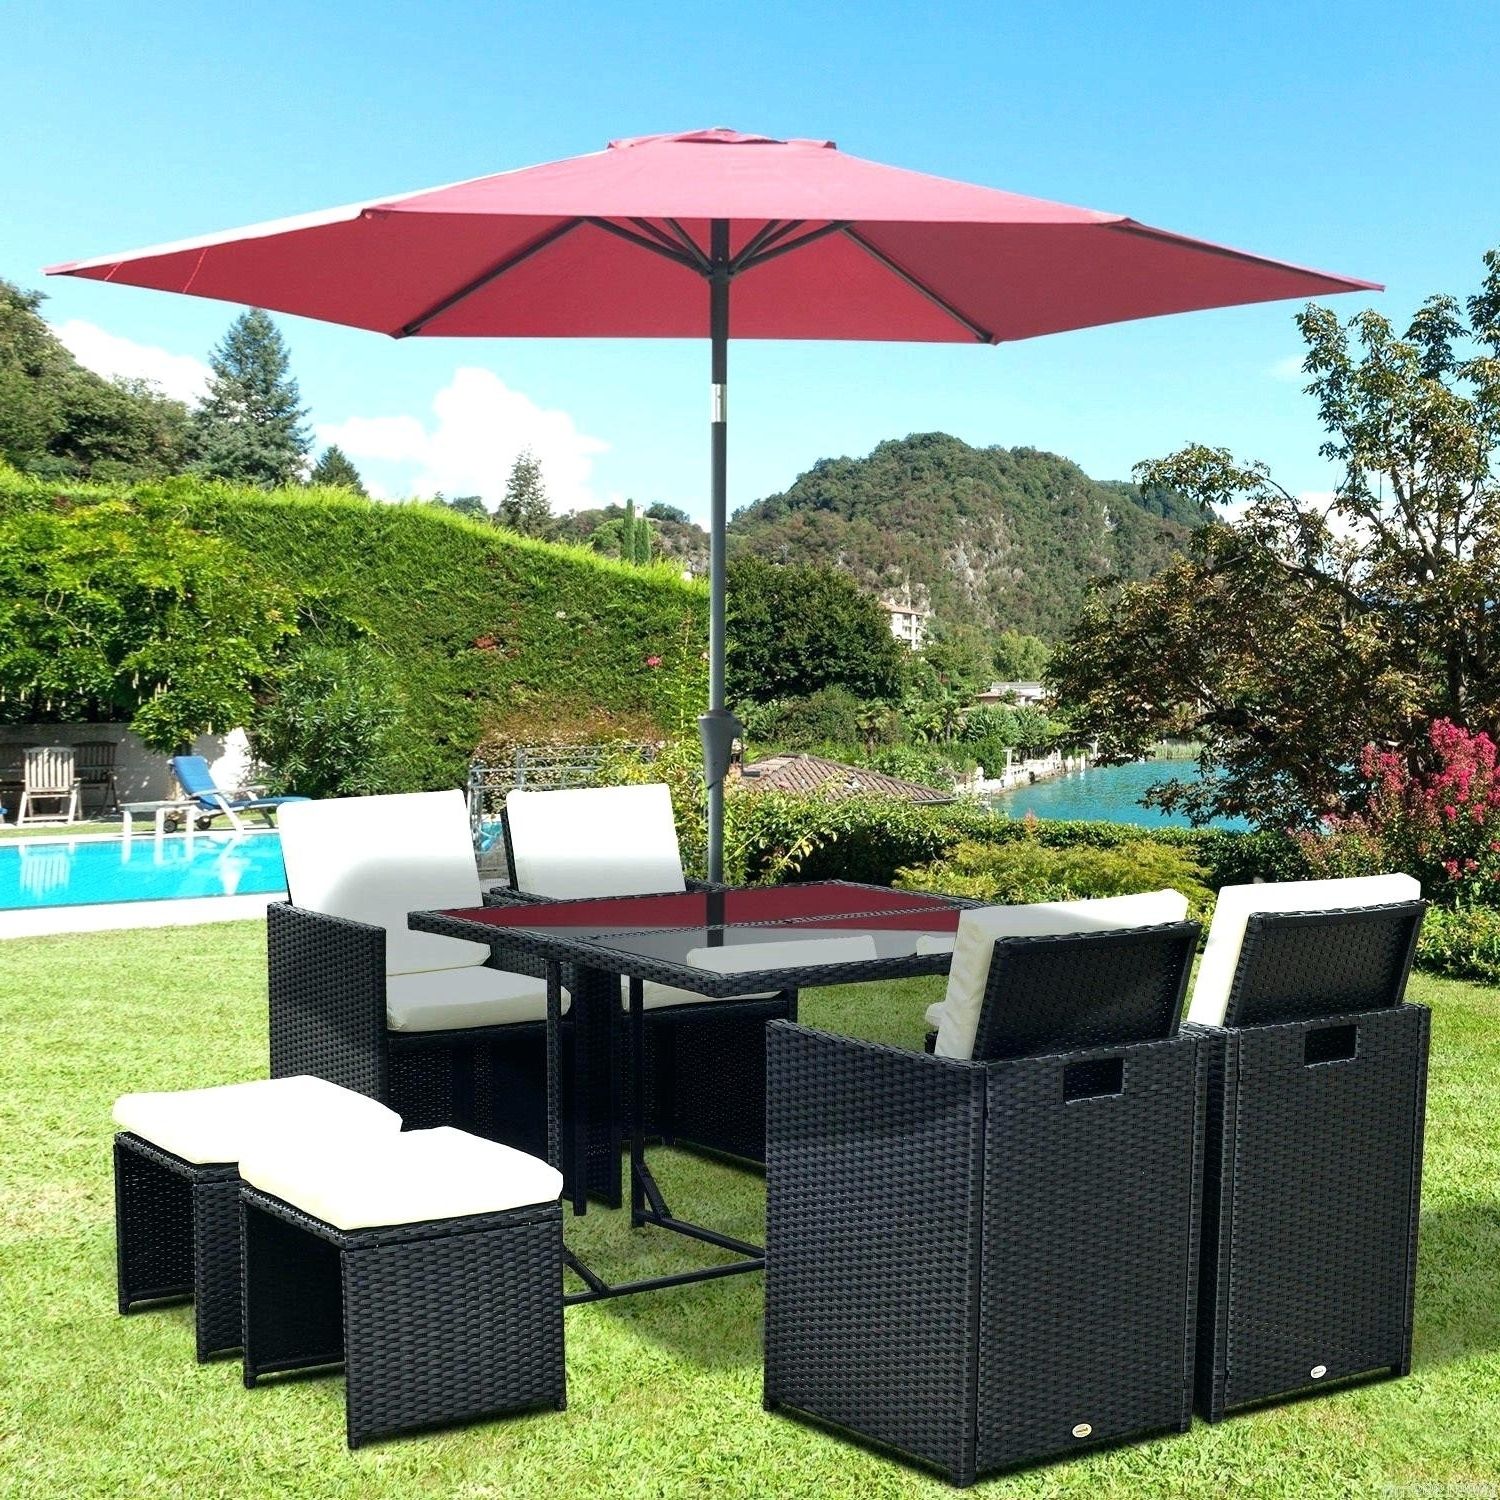 2019 Patio Umbrellas With Fringe Intended For 44 Patio Umbrella With Fringe Hm5k – Mcnamaralaw (View 10 of 20)